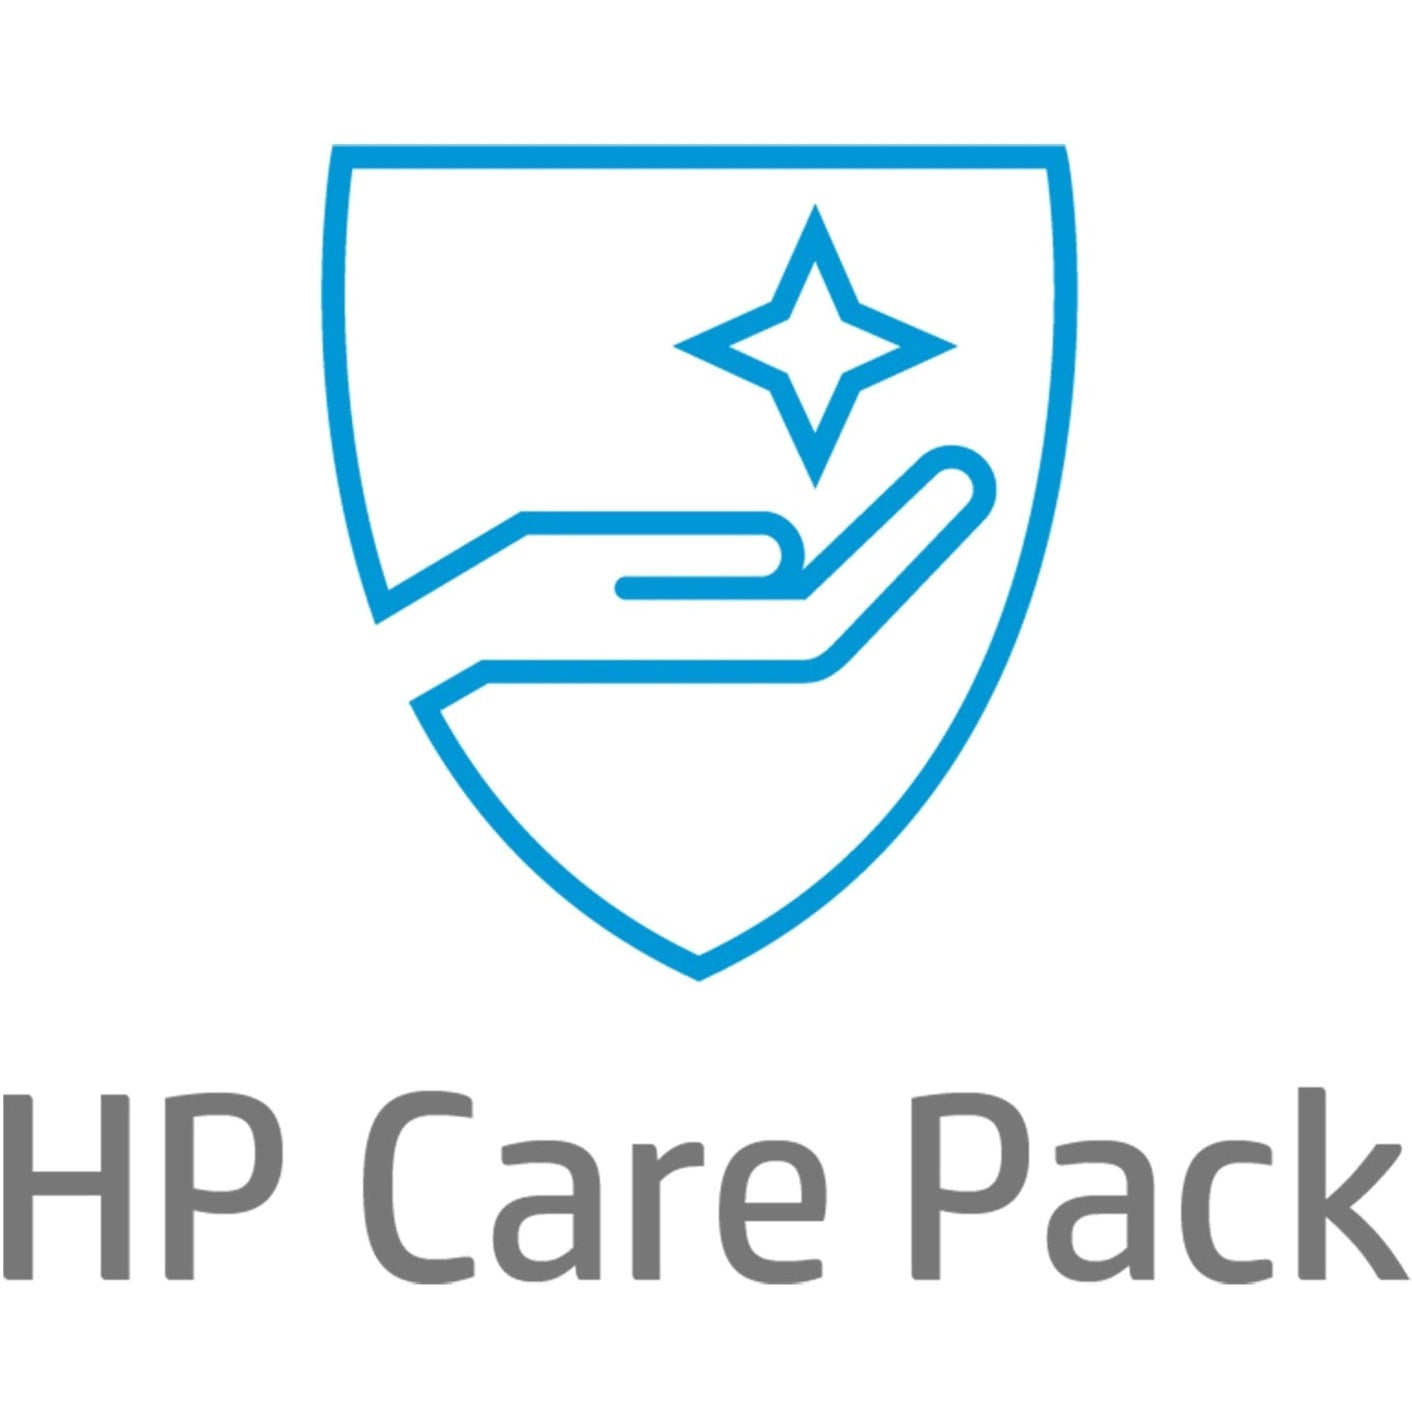 HP Care Pack with Accidental Damage Protection G2 - Extended Service - 3 Year - Service (U9DQ1E)